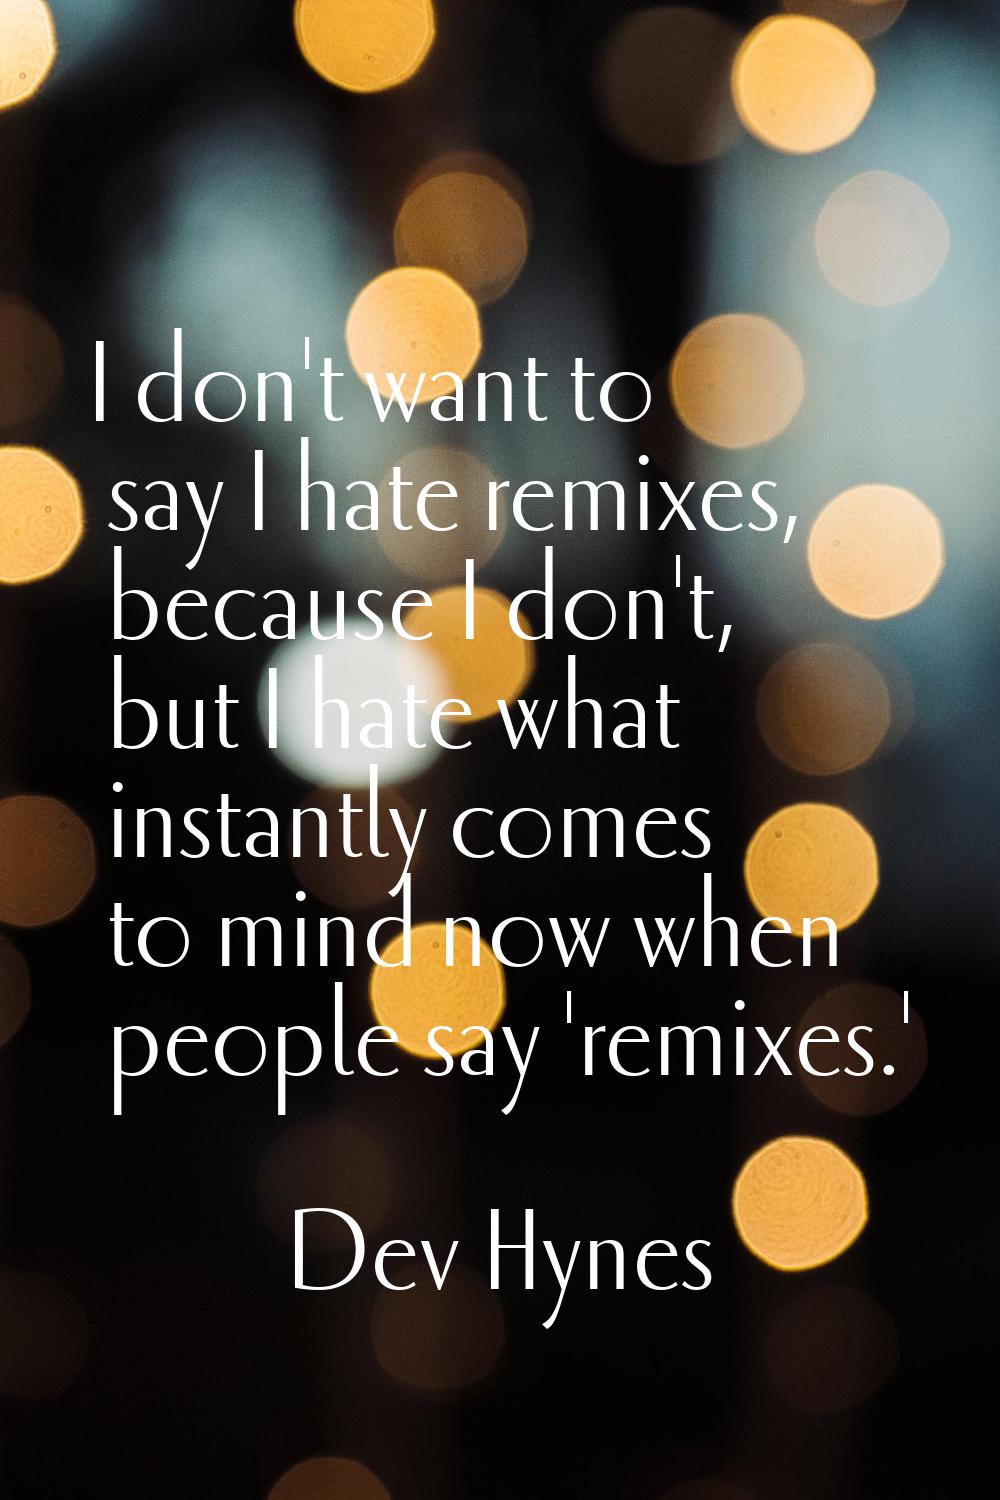 I don't want to say I hate remixes, because I don't, but I hate what instantly comes to mind now wh